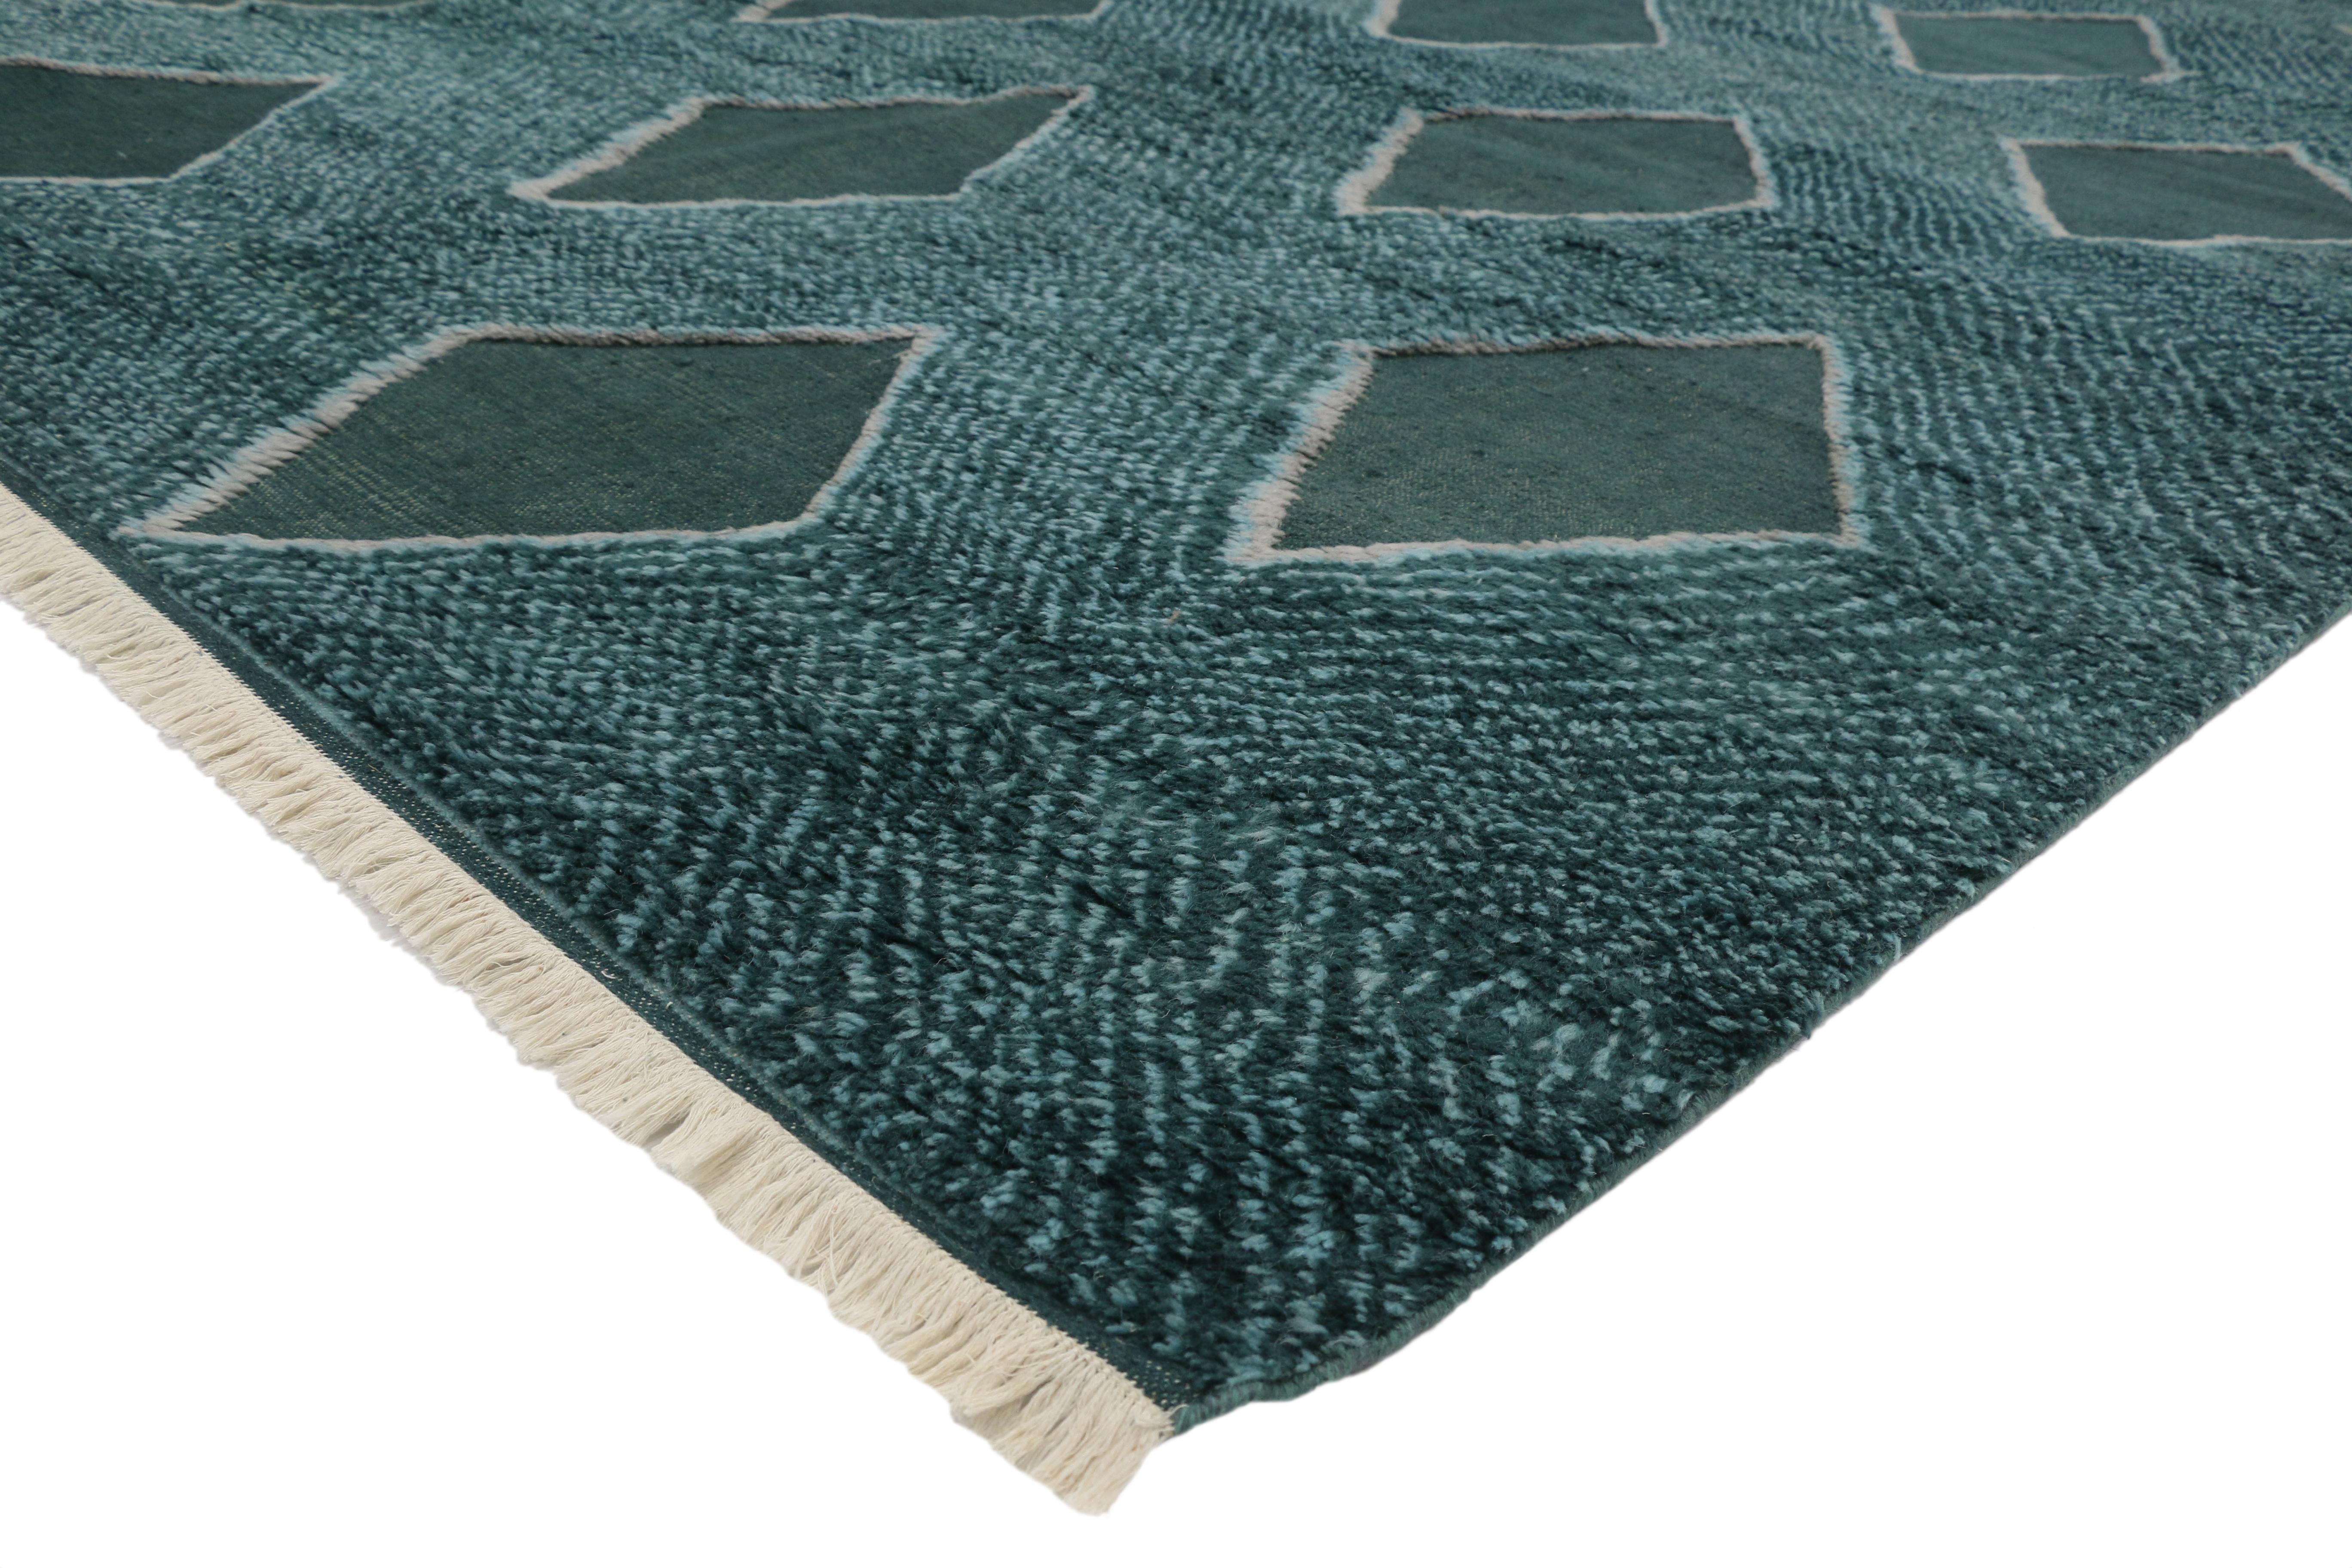 30482 new contemporary Moroccan texture area rug geometric diamond pattern. Drawing inspiration from Pantone's Paint Color of the Year, Night Watch and the plush pile from The Berber Tribes of Morocco, this hand knotted contemporary Moroccan Texture